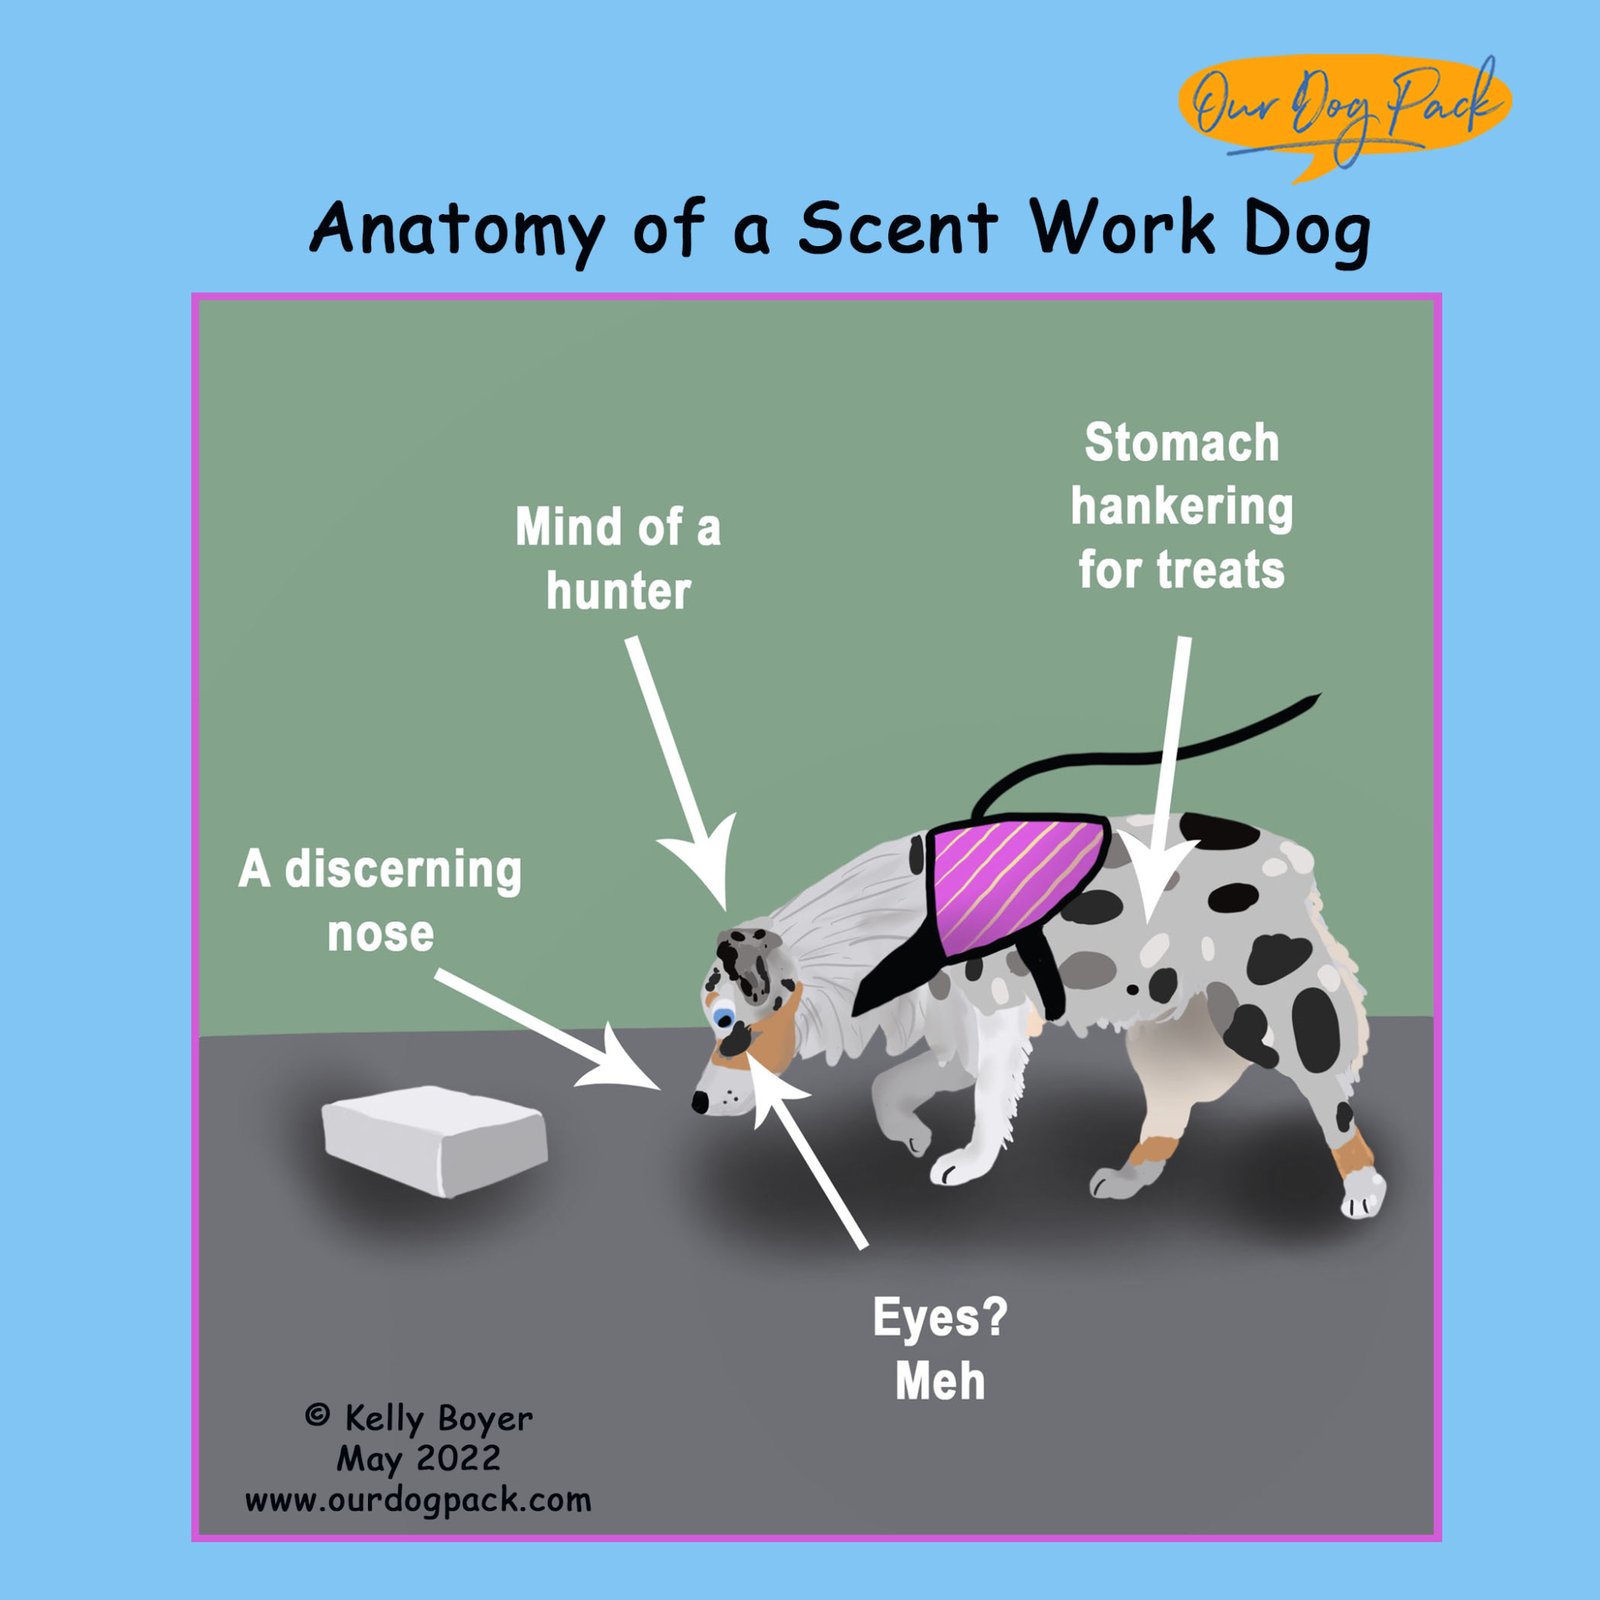 Anatomy of a Scent Work Dog